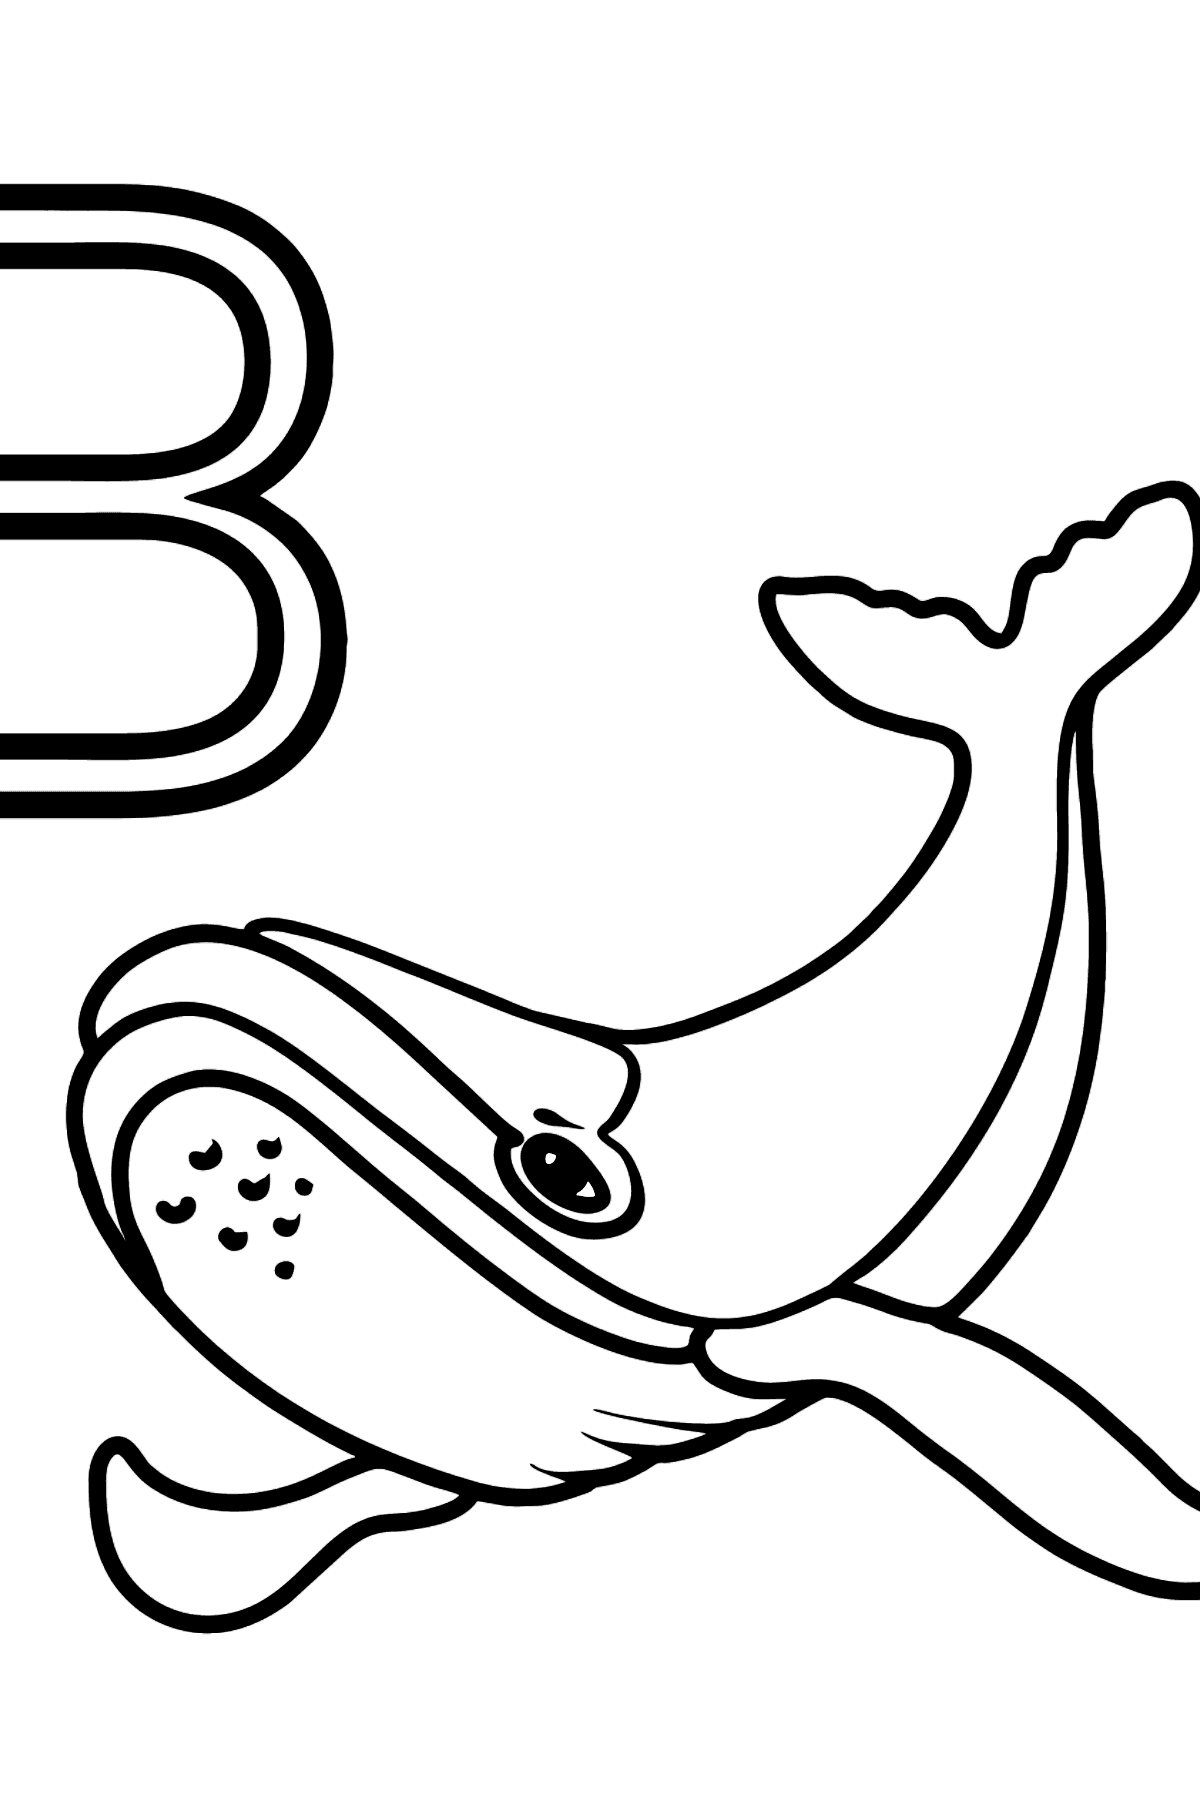 French Letter B coloring pages - BALEINE - Coloring Pages for Kids